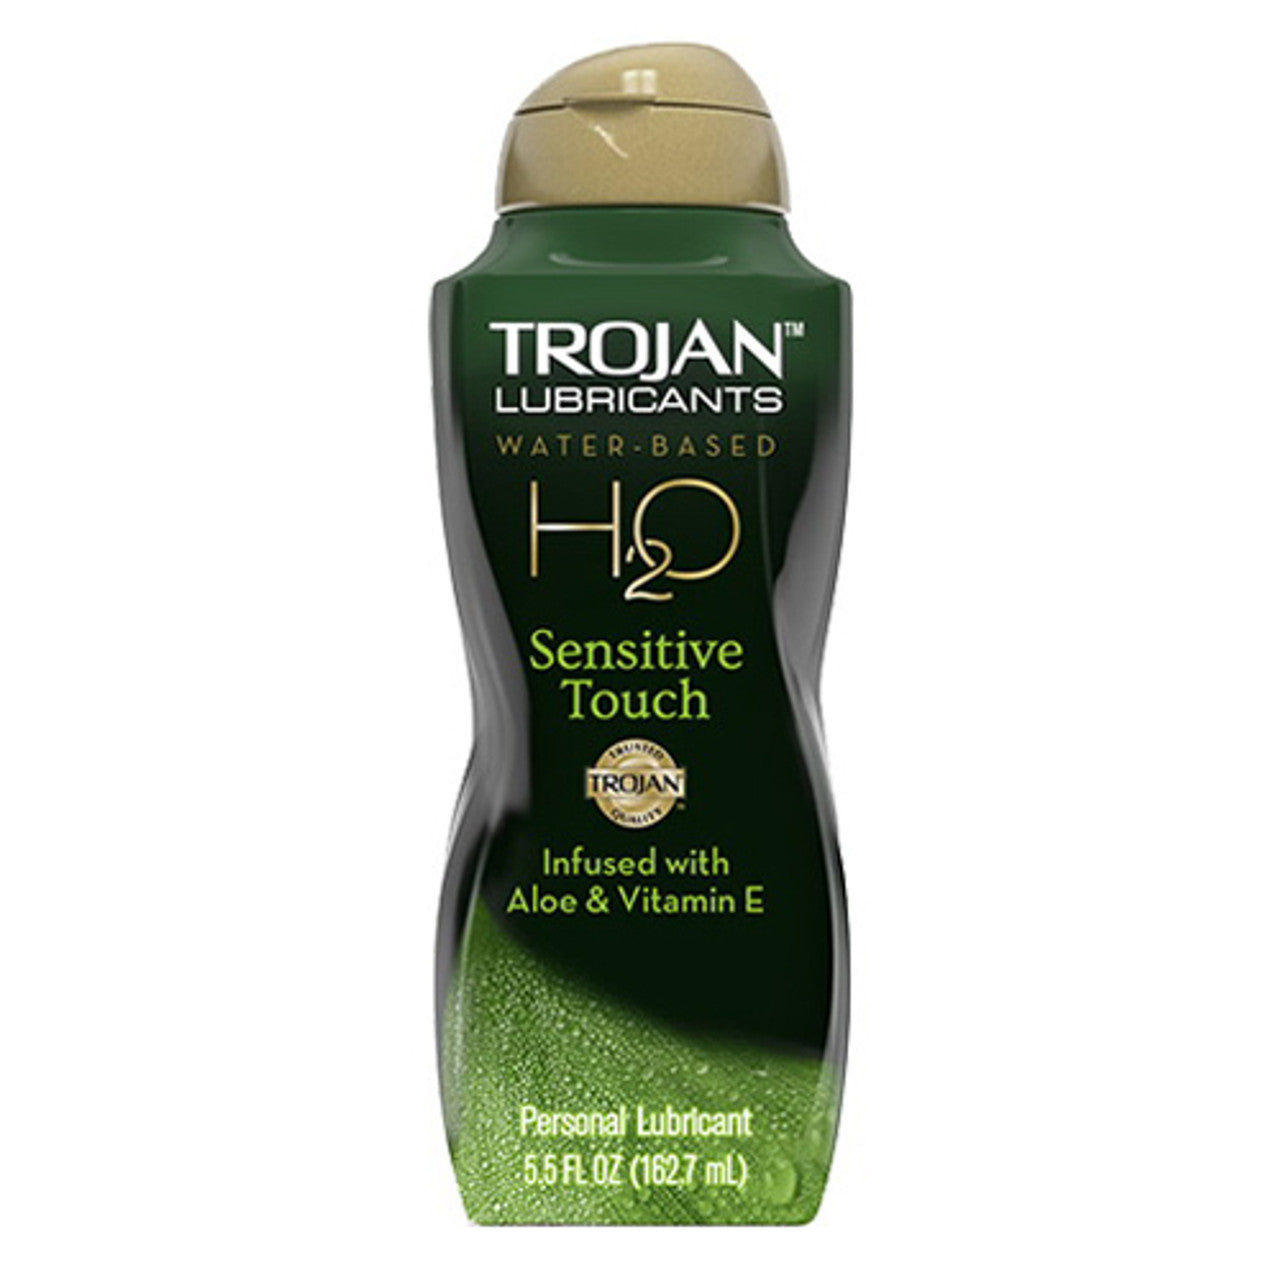 Trojan Water Based H2O Sensitive Touch Lubricants - 5.5 Oz